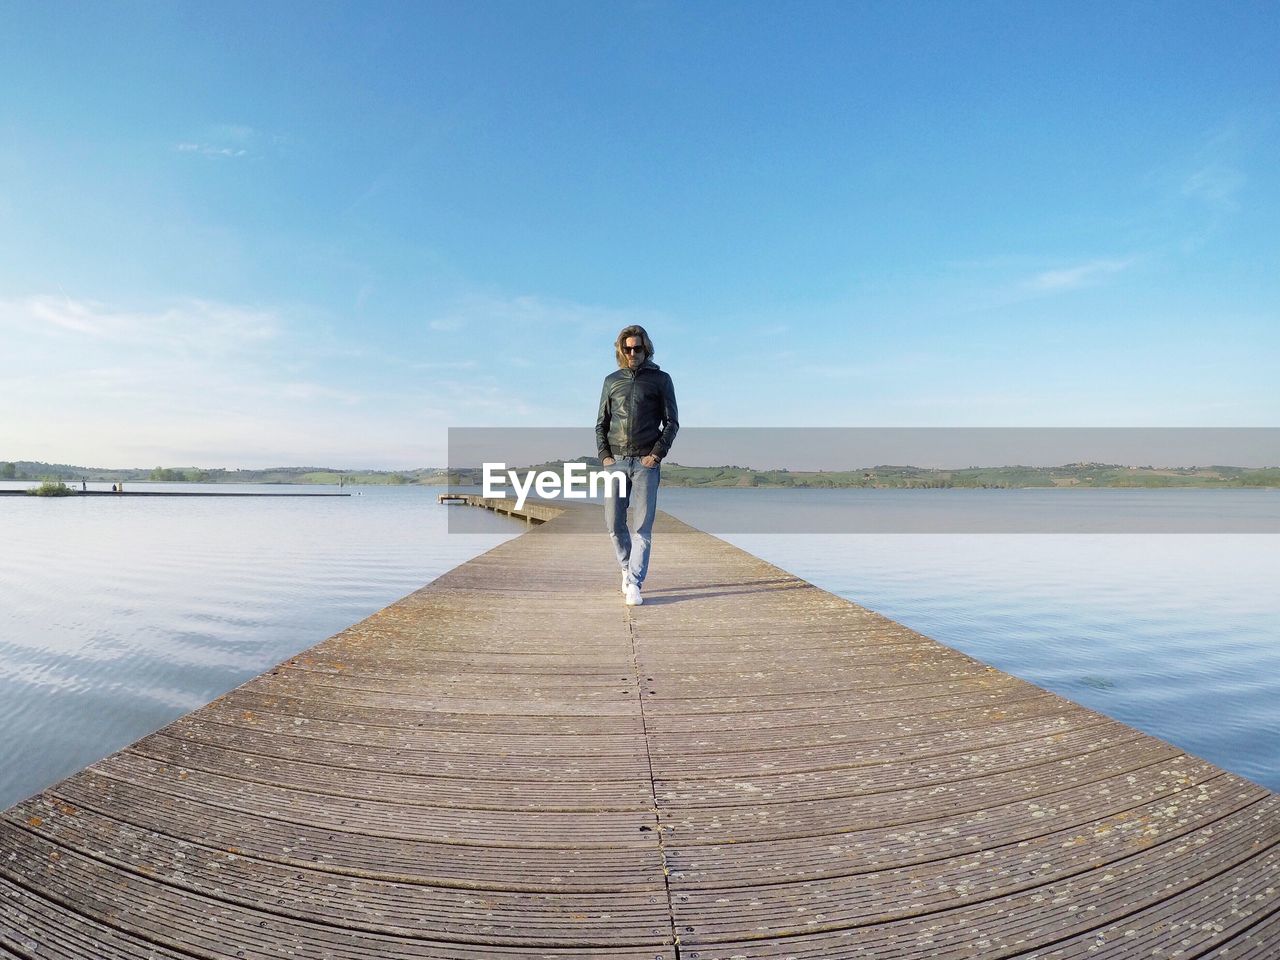 Fish-eye view of man walking on jetty over lake against blue sky